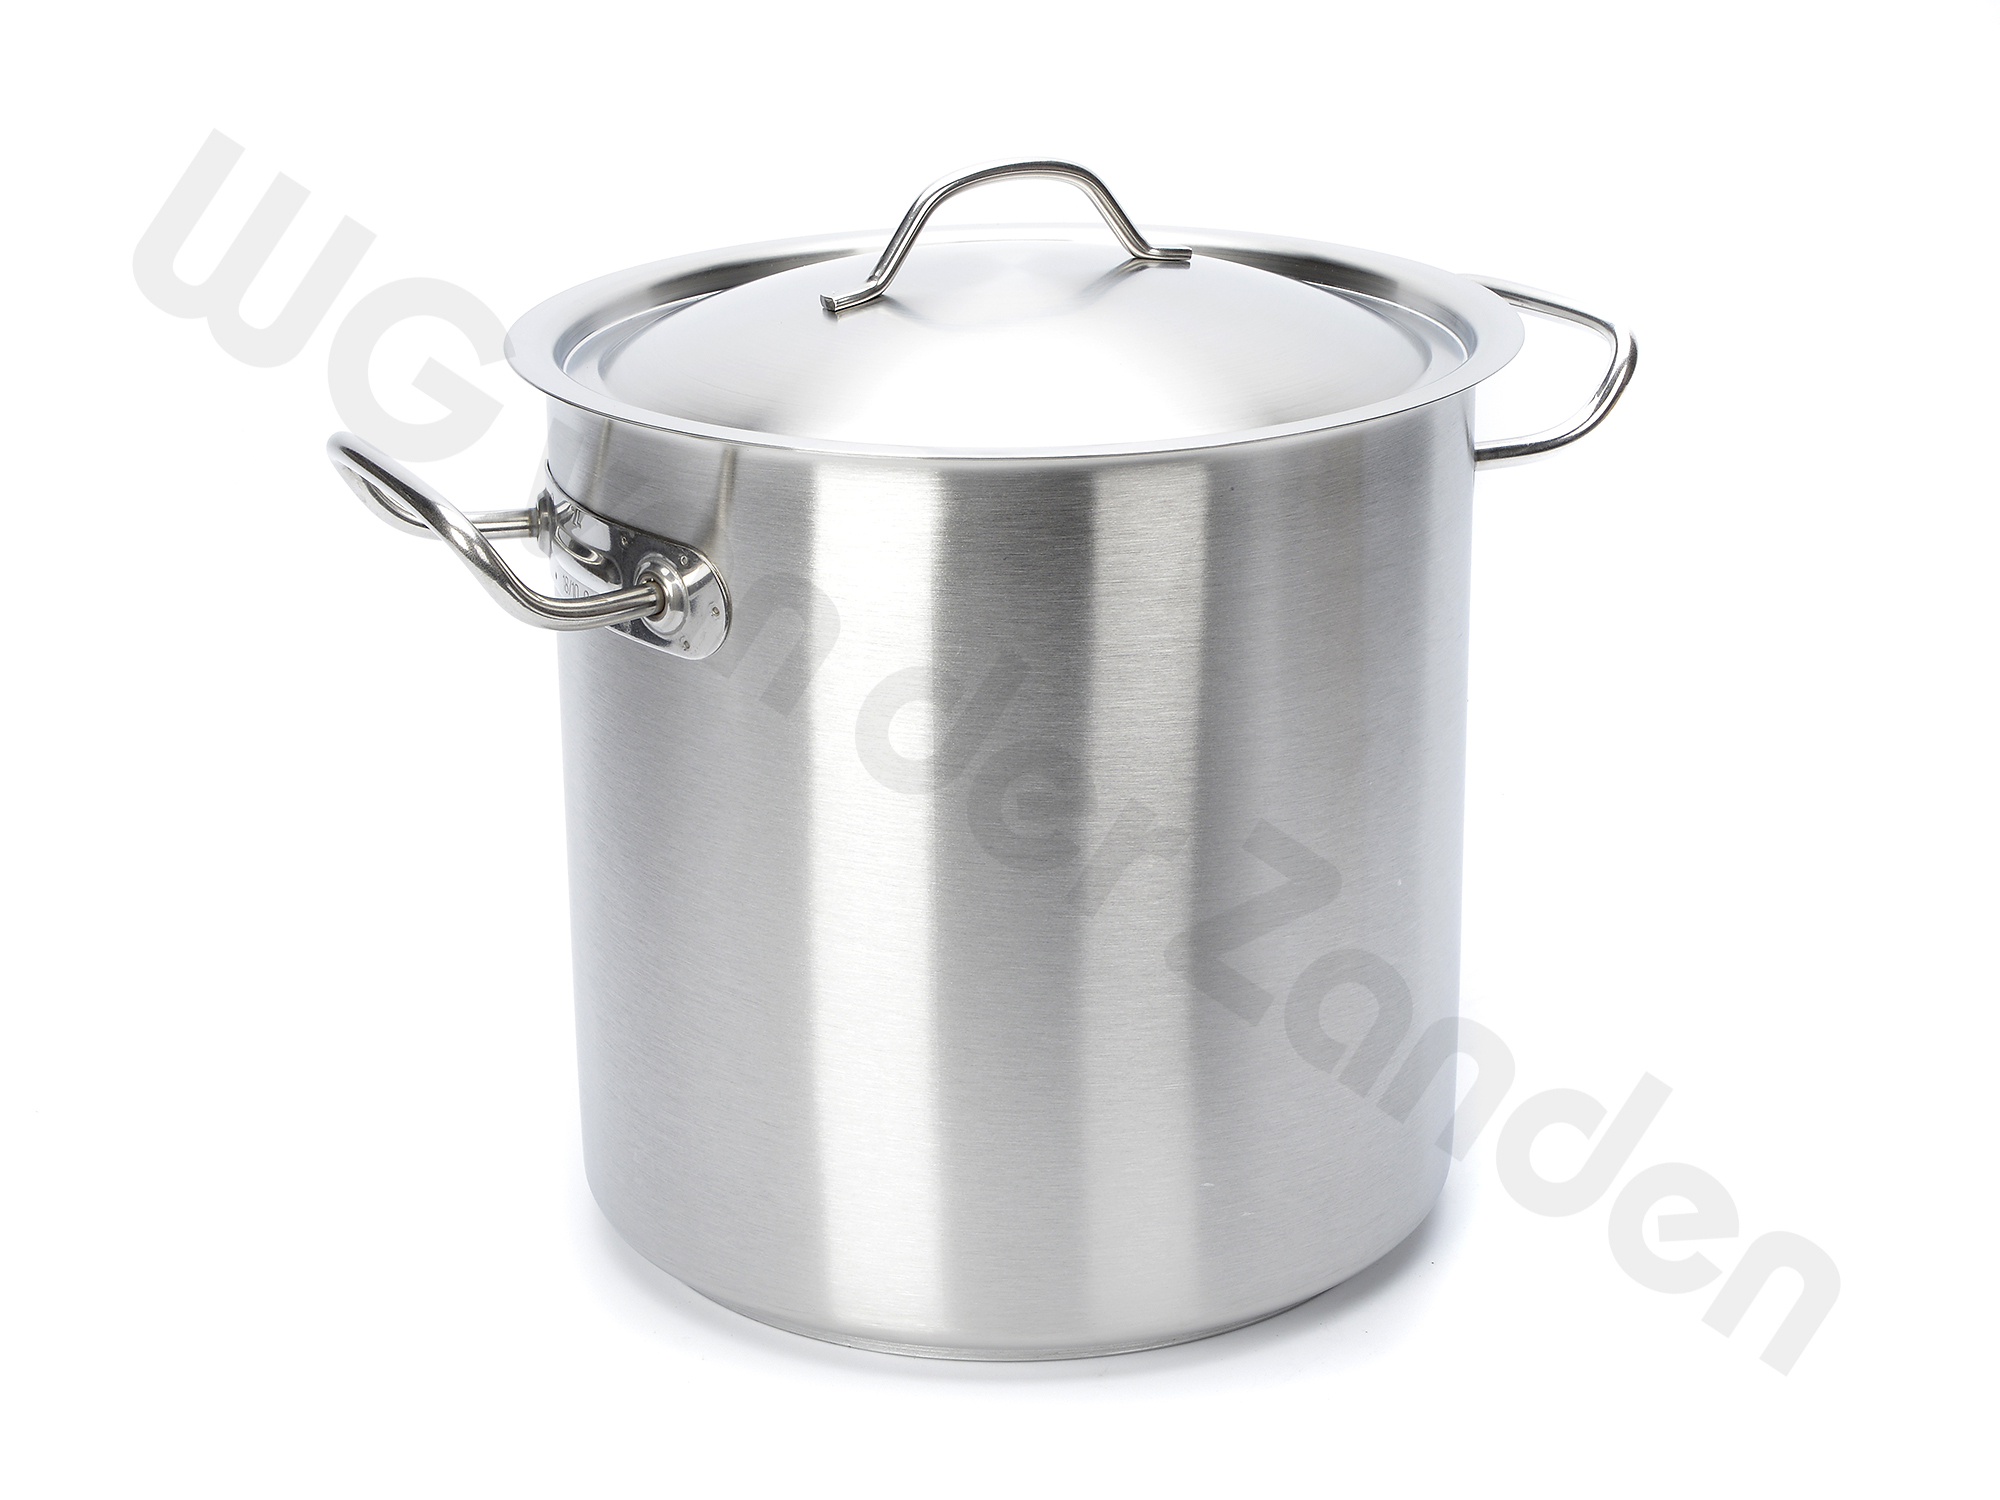 522020 STOCKPOT S/S 20Ø X 20CM 6.1 LTR WITH COVER